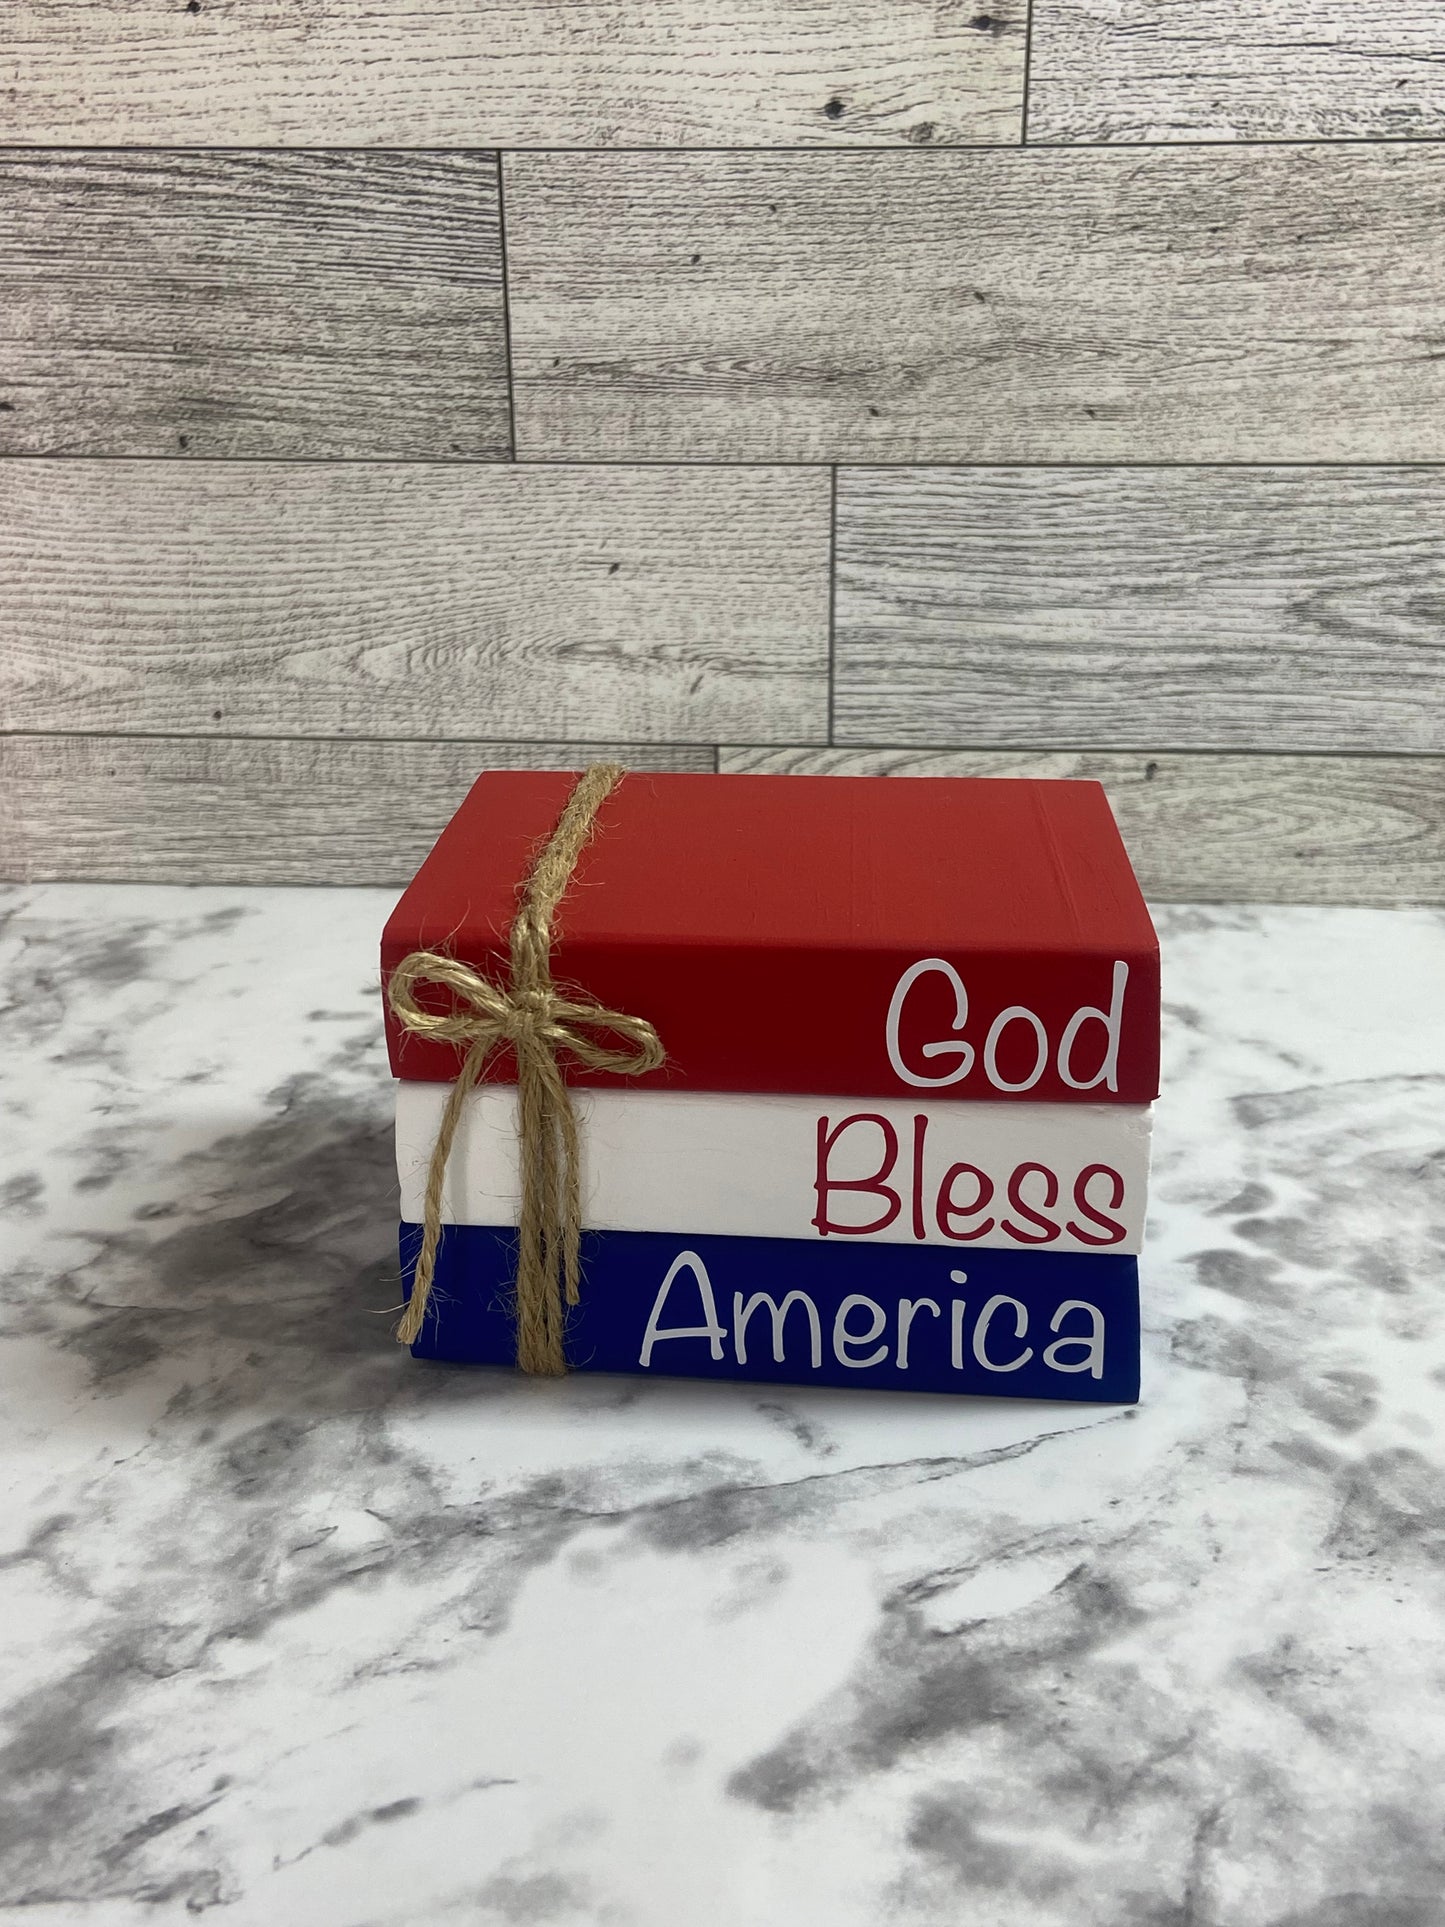 God Bless America - Medium Tiered Tray Book Stack